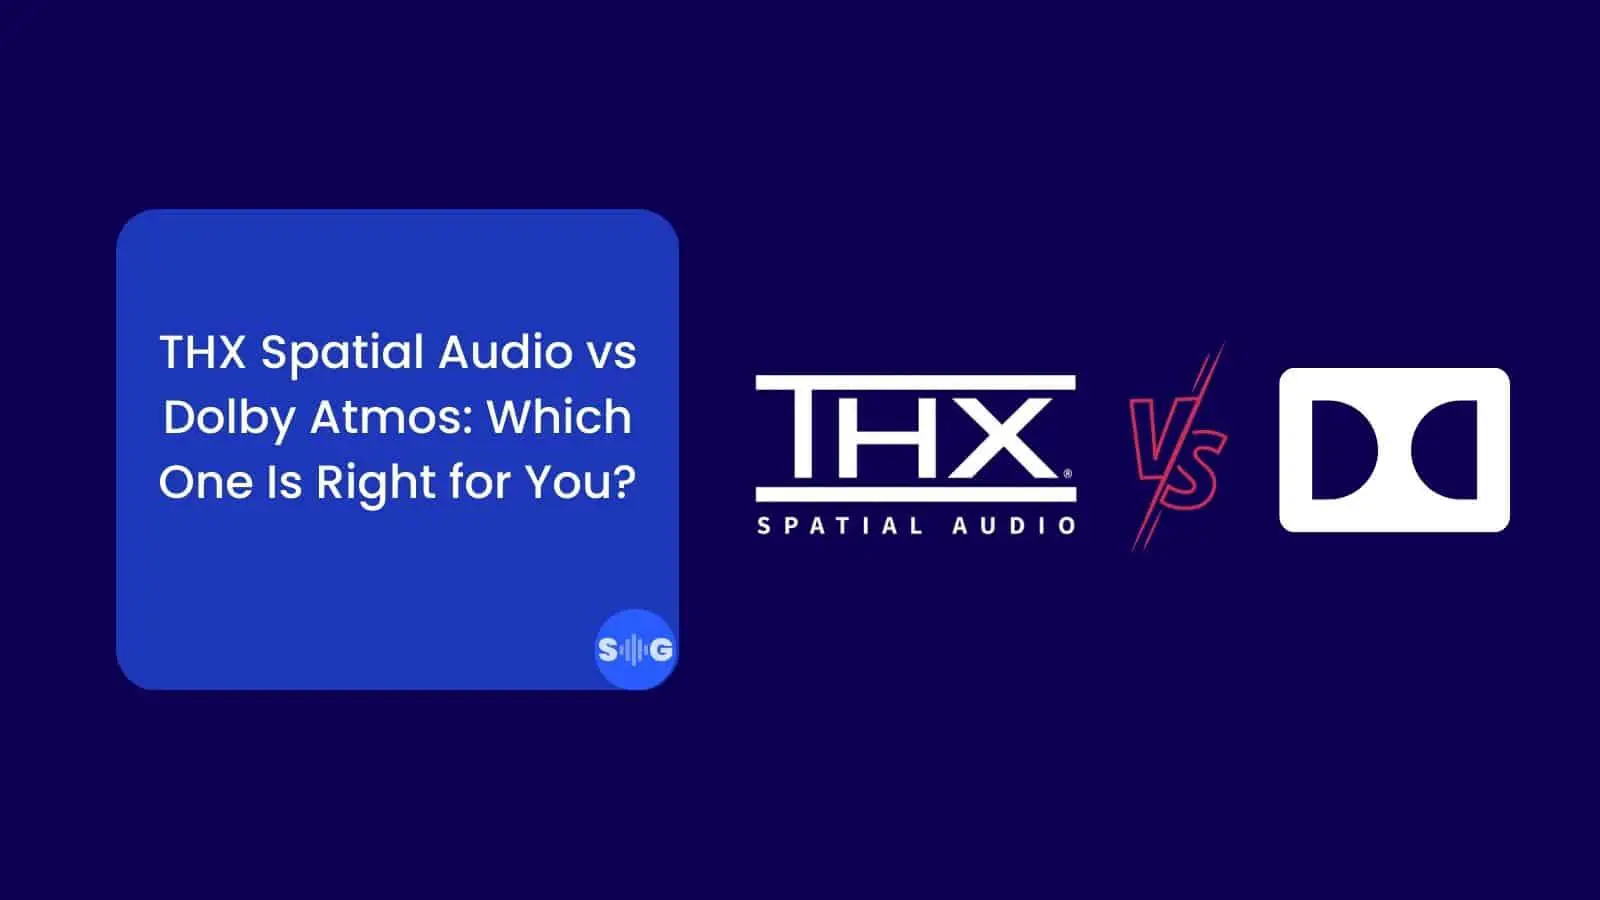 THX Spatial Audio vs Dolby Atmos Which One Is Right for You -soundgulf.com